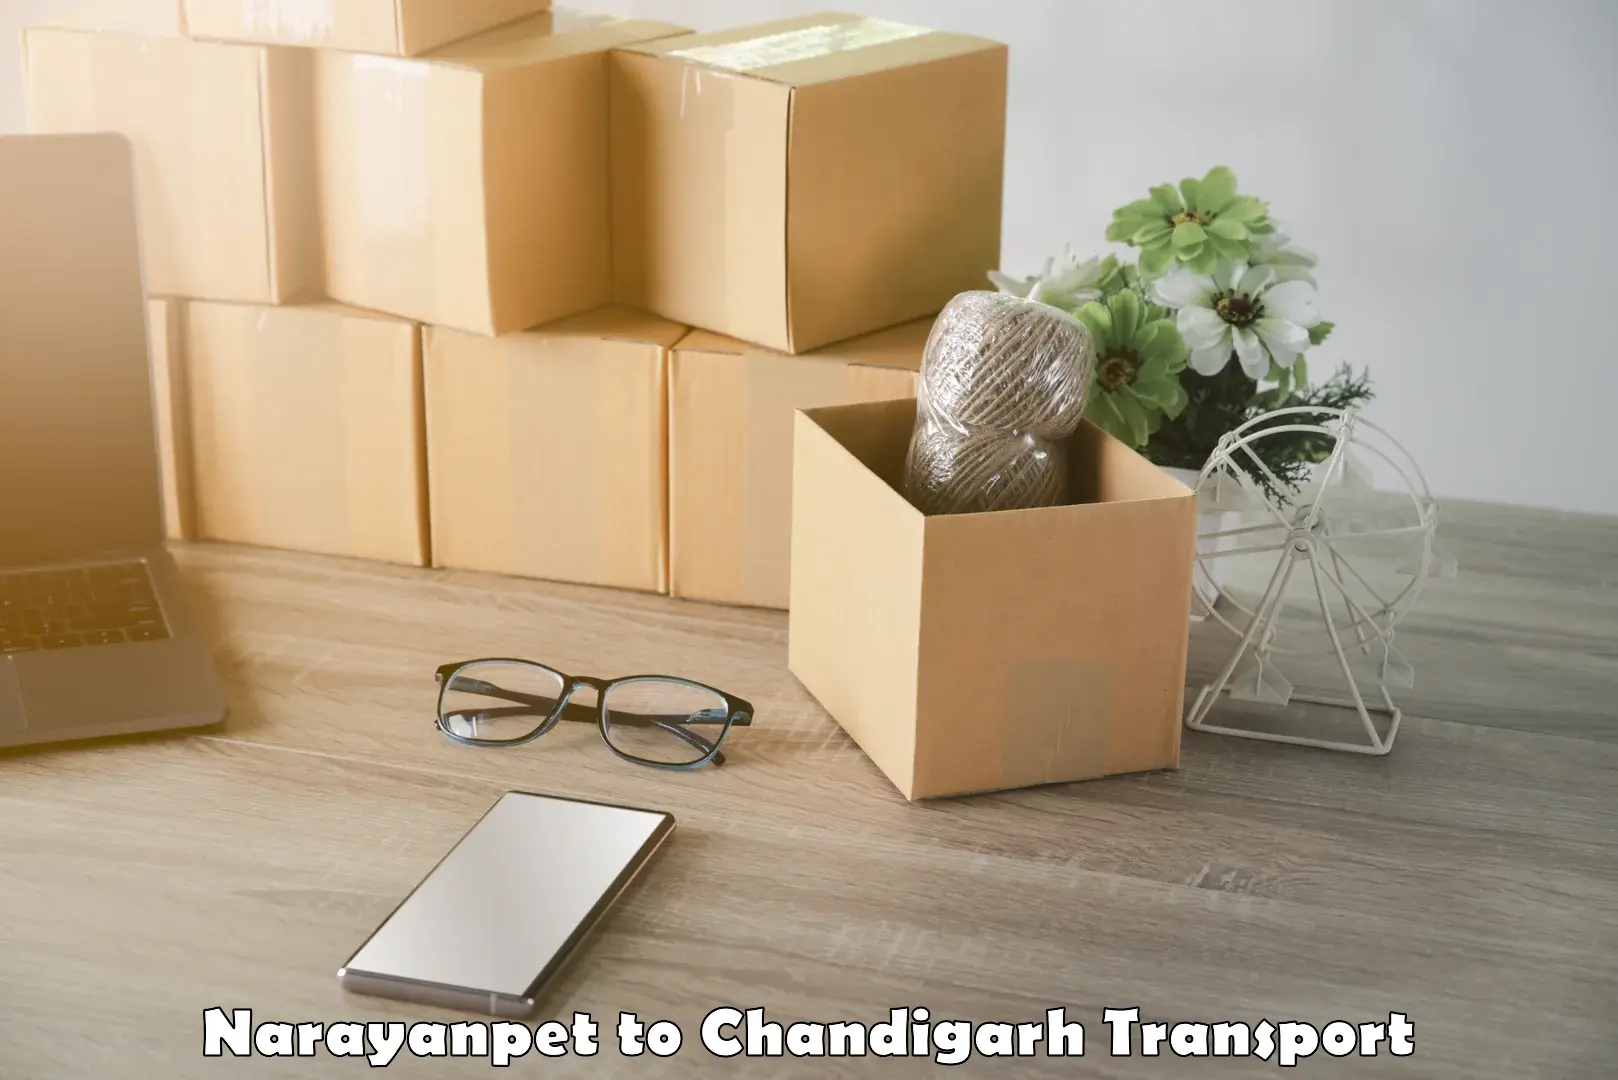 Goods delivery service Narayanpet to Chandigarh